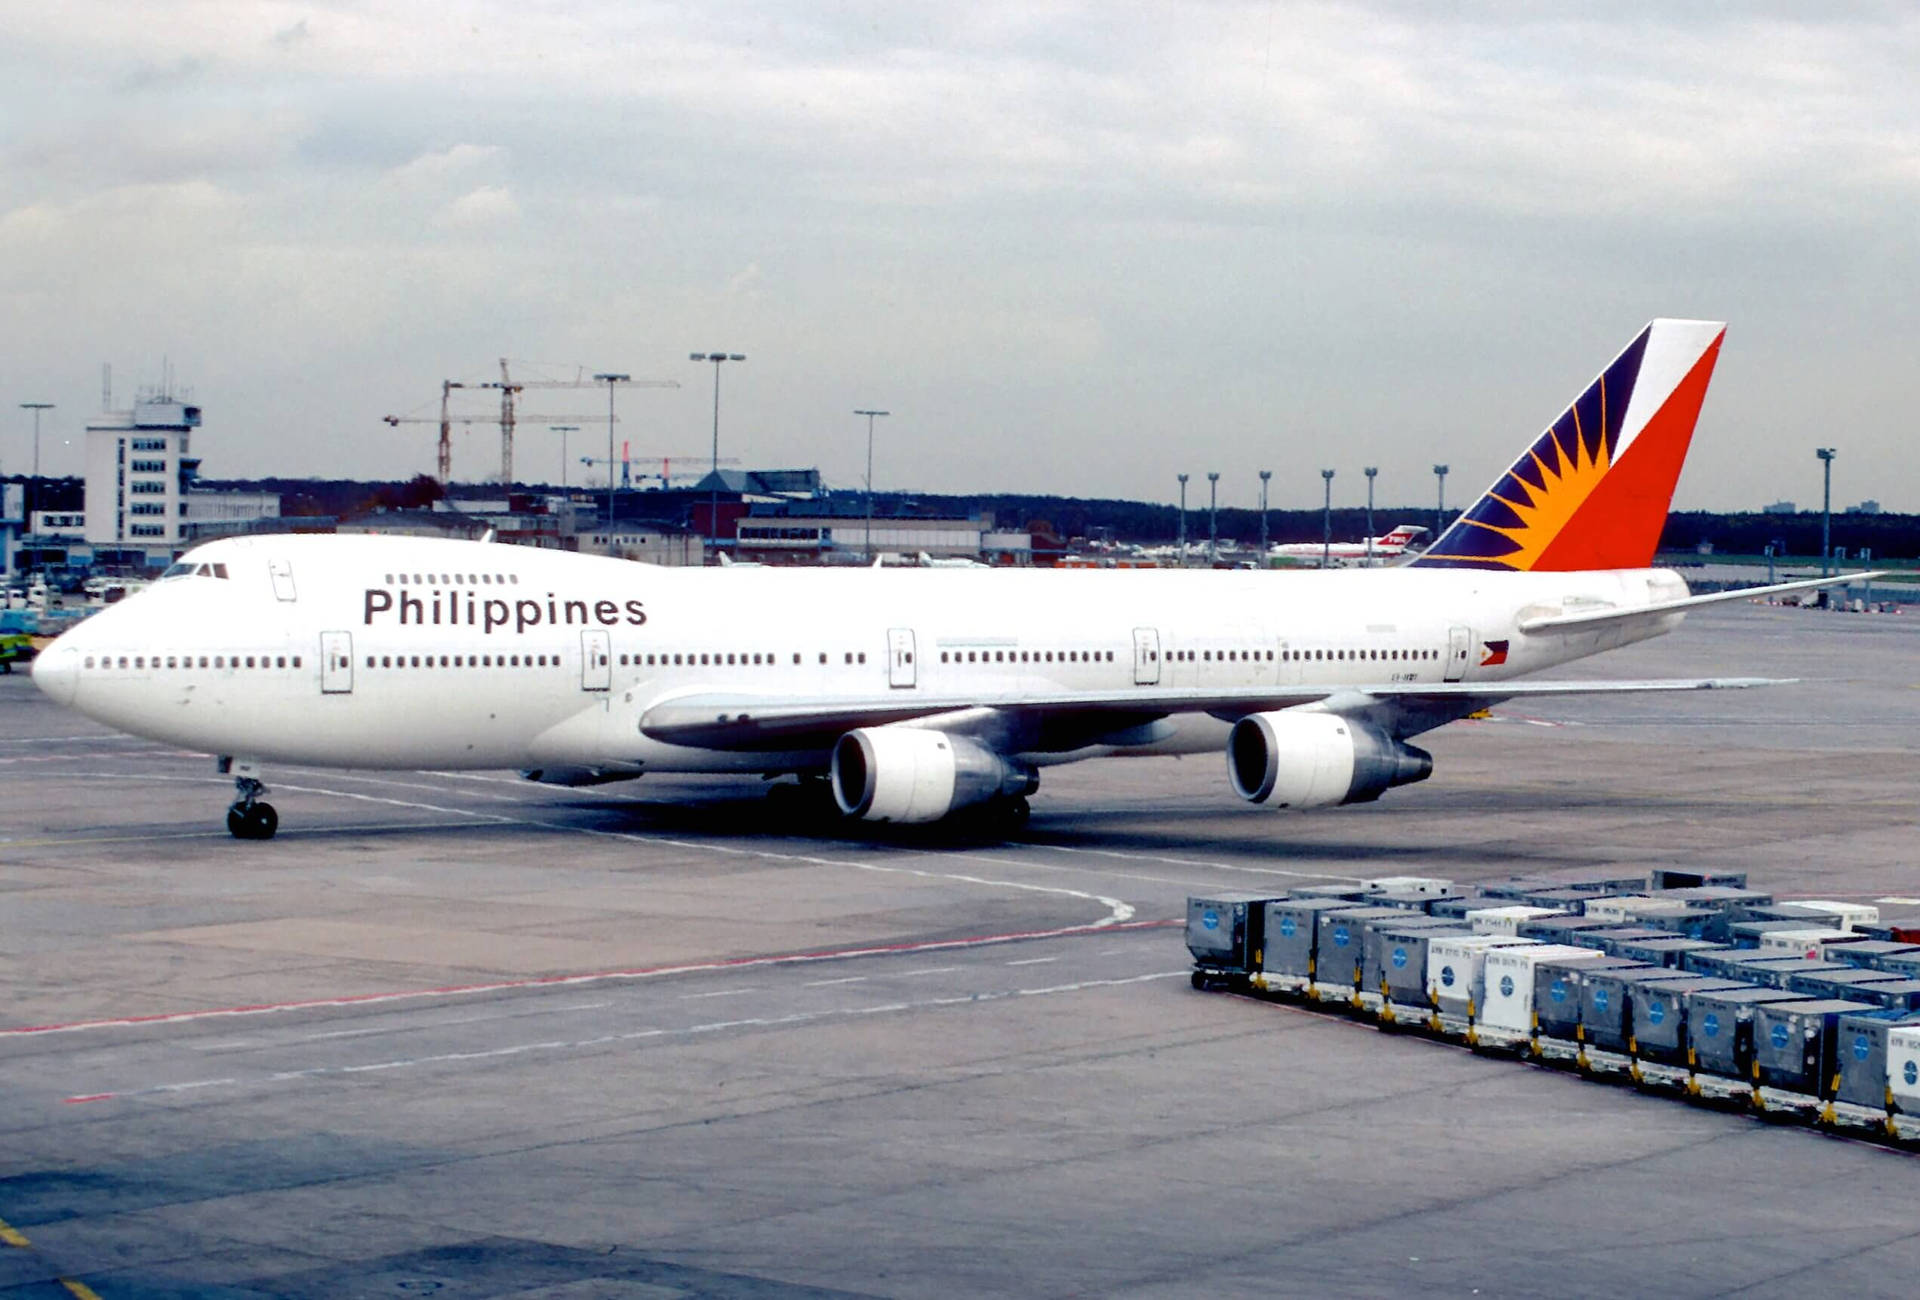 Philippine Airlines On Airport Runway With Cargo Wallpaper